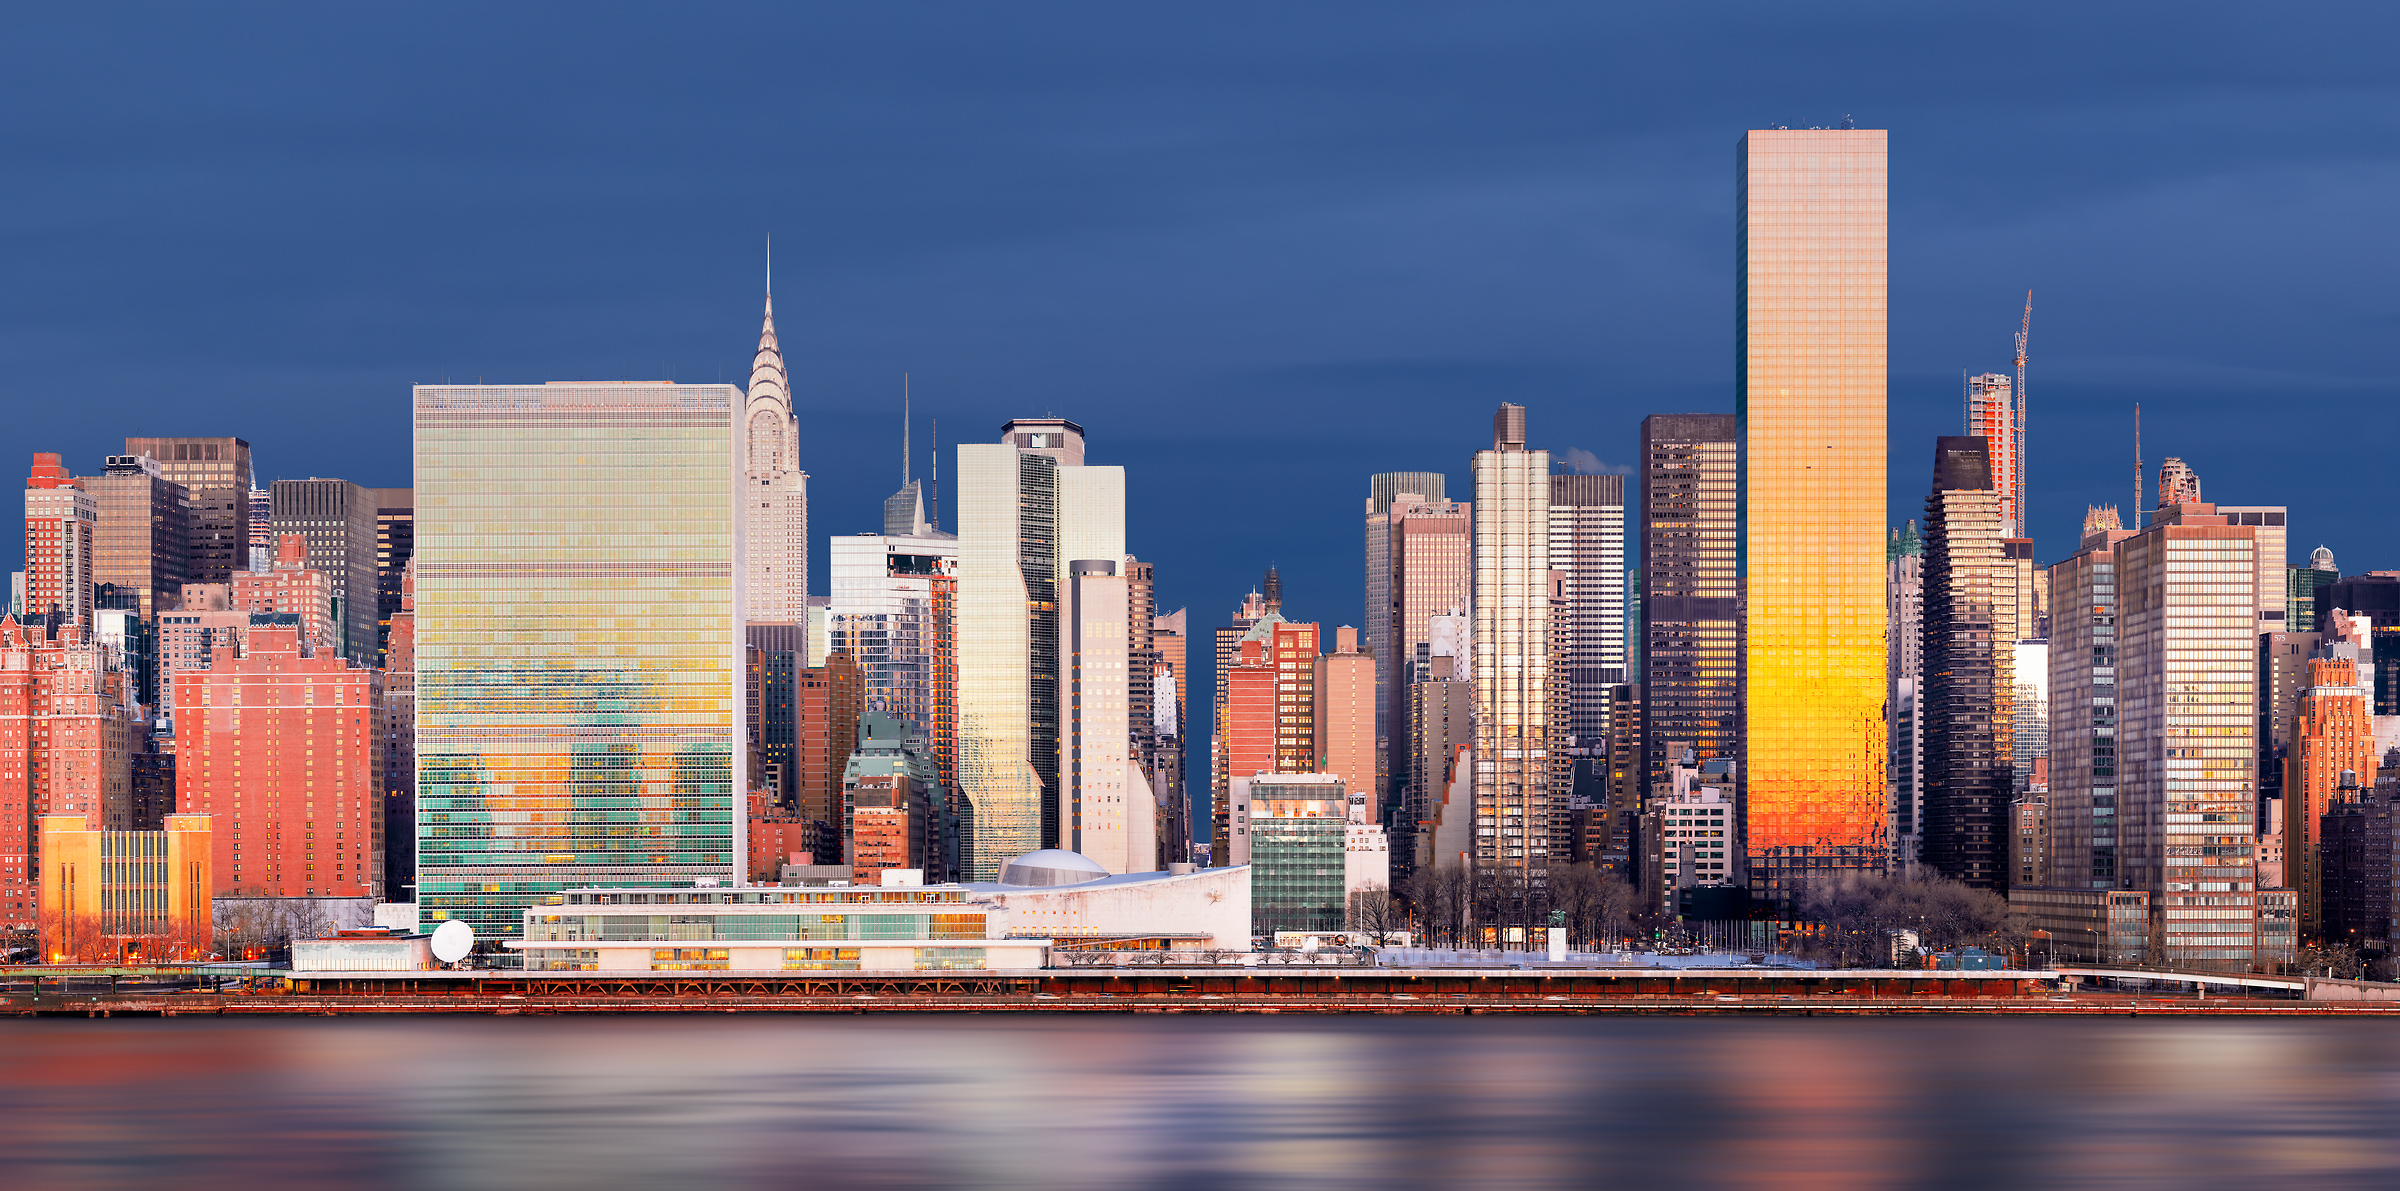 542 megapixels! A very high resolution, large-format VAST photo of the New York City skyline and buildings; gigapixel photograph created by Dan Piech in Manhattan.